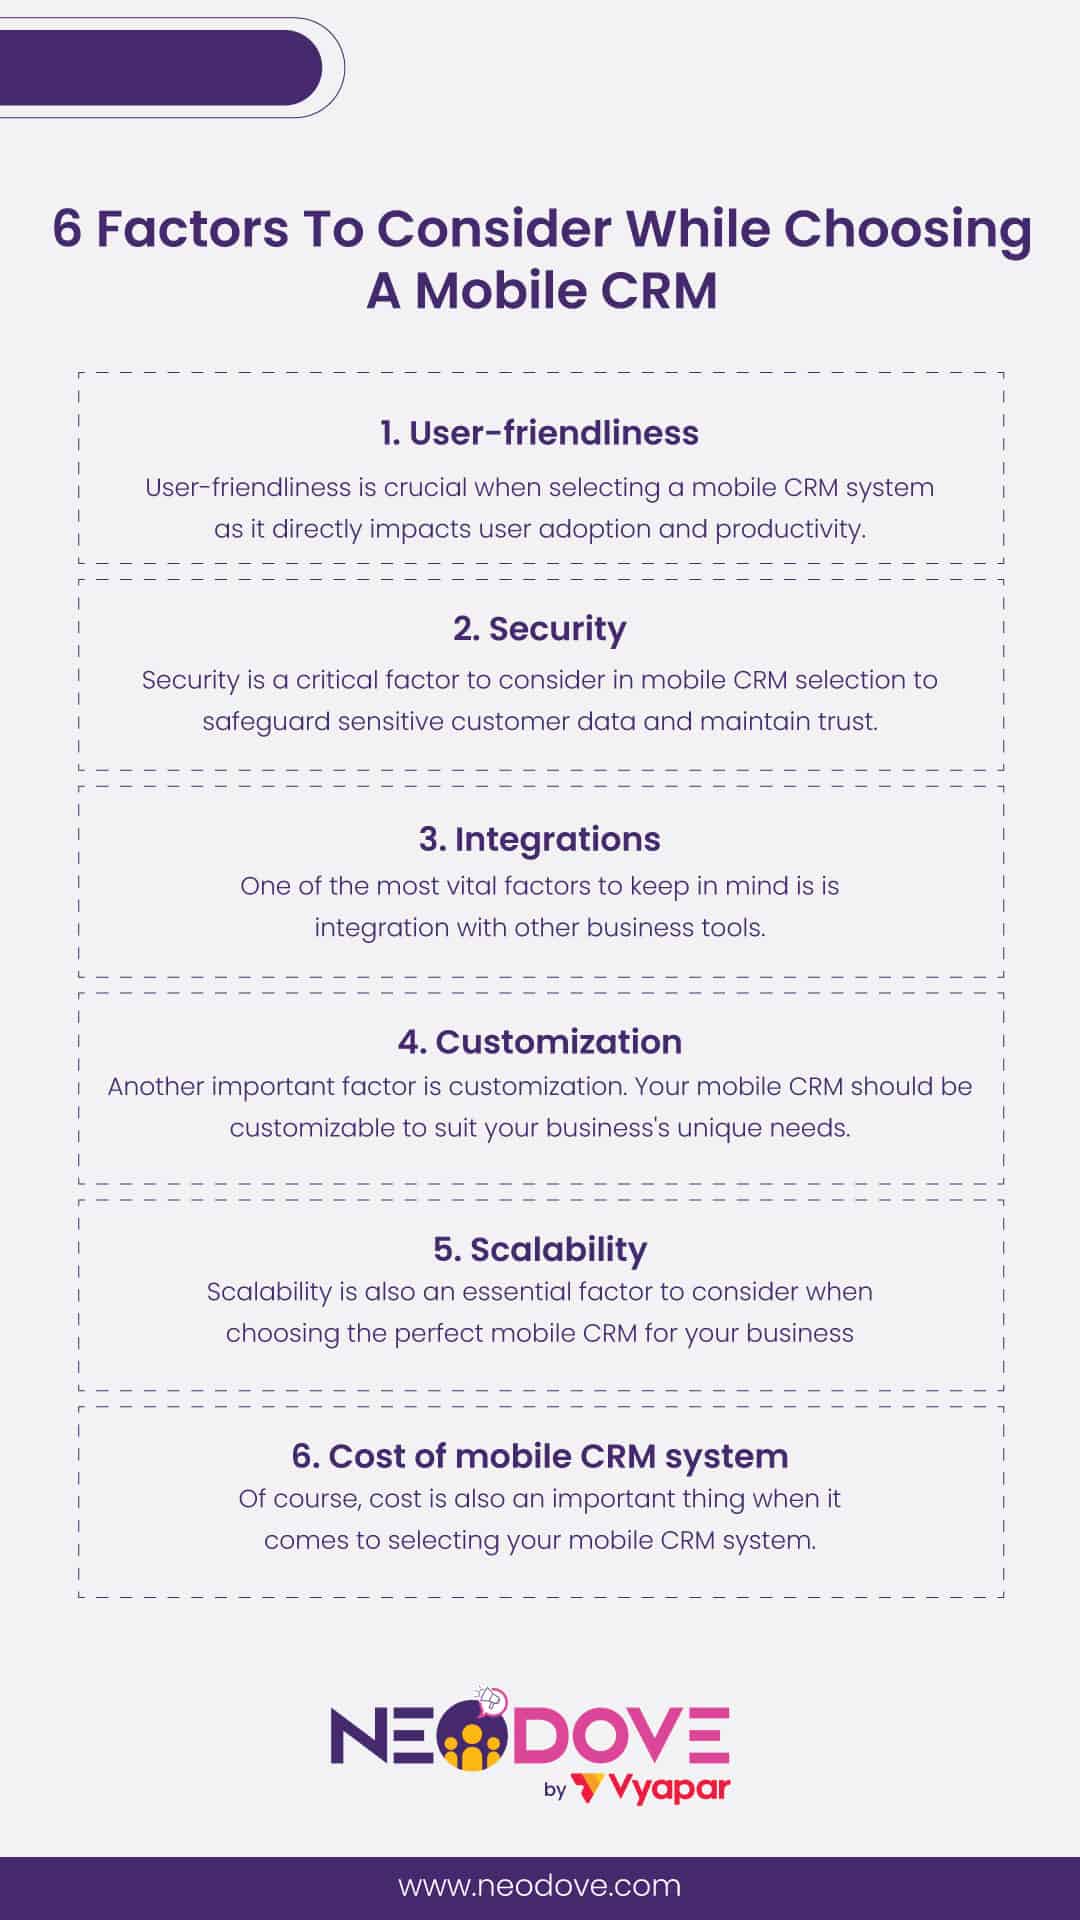 6 Factors To Consider While Choosing A Mobile CRM - NeoDove